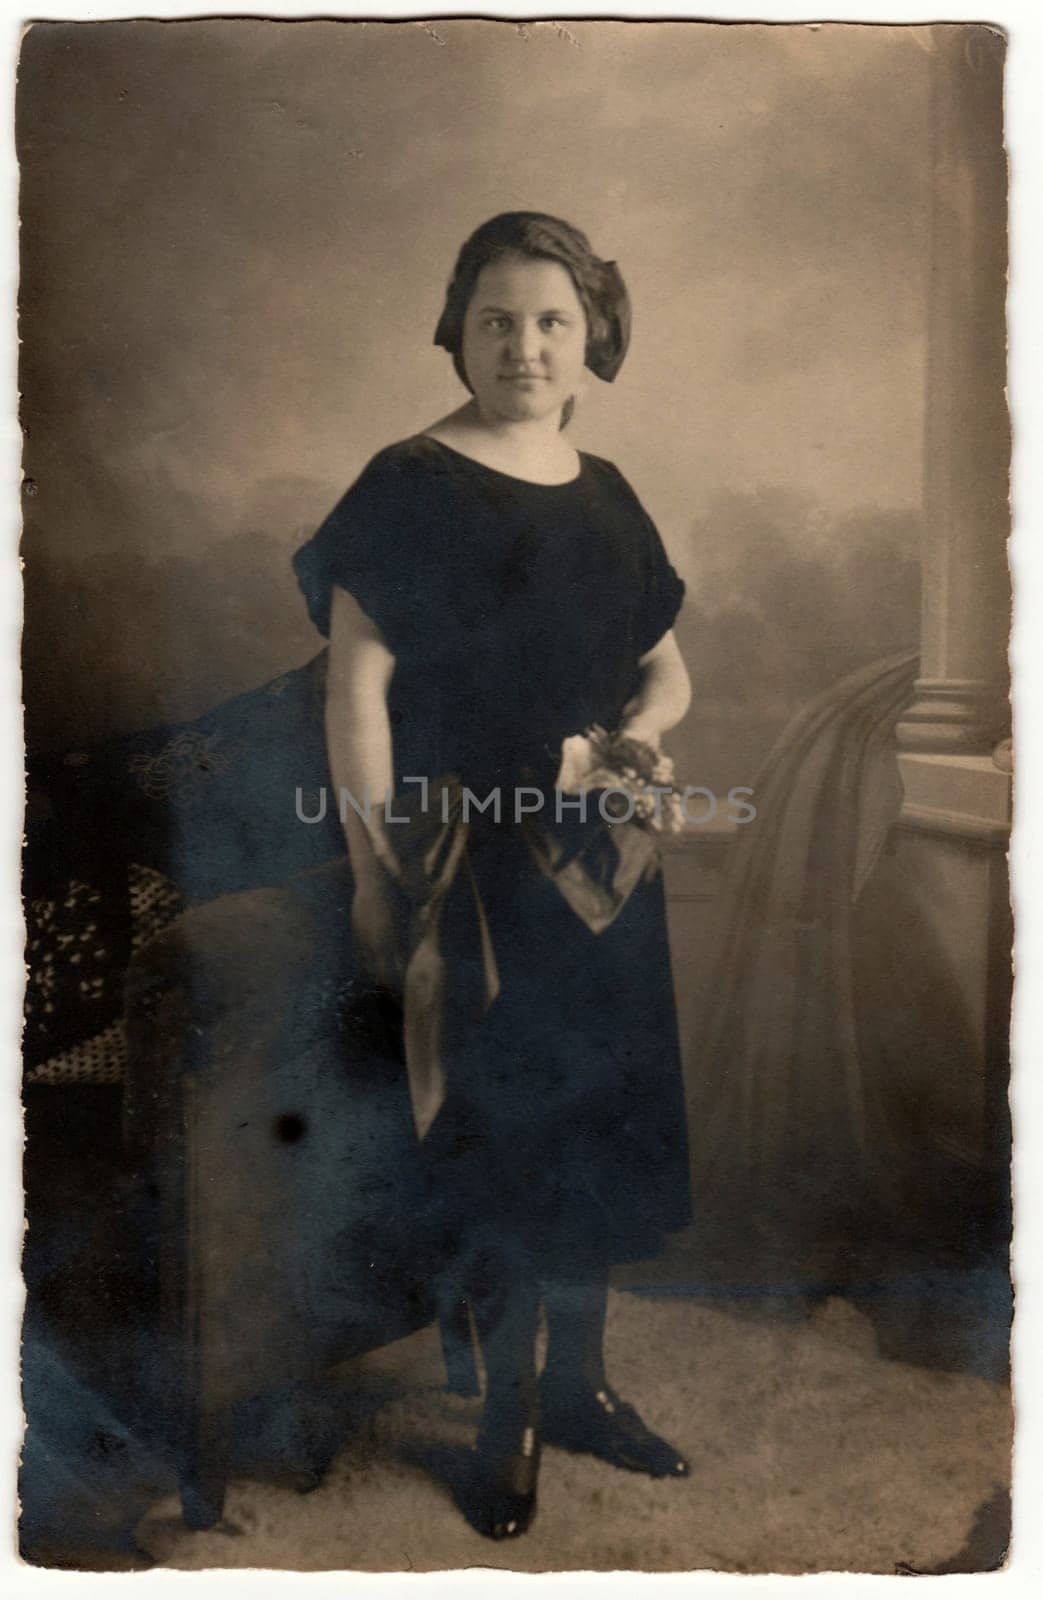 GERMANY - CIRCA 1920s: Vintage photo shows woman with short hair. Woman wears black dress and holds bouquet - bunch of flowers. Retro black and white studio photography with sepia effect. Circa 1920s.